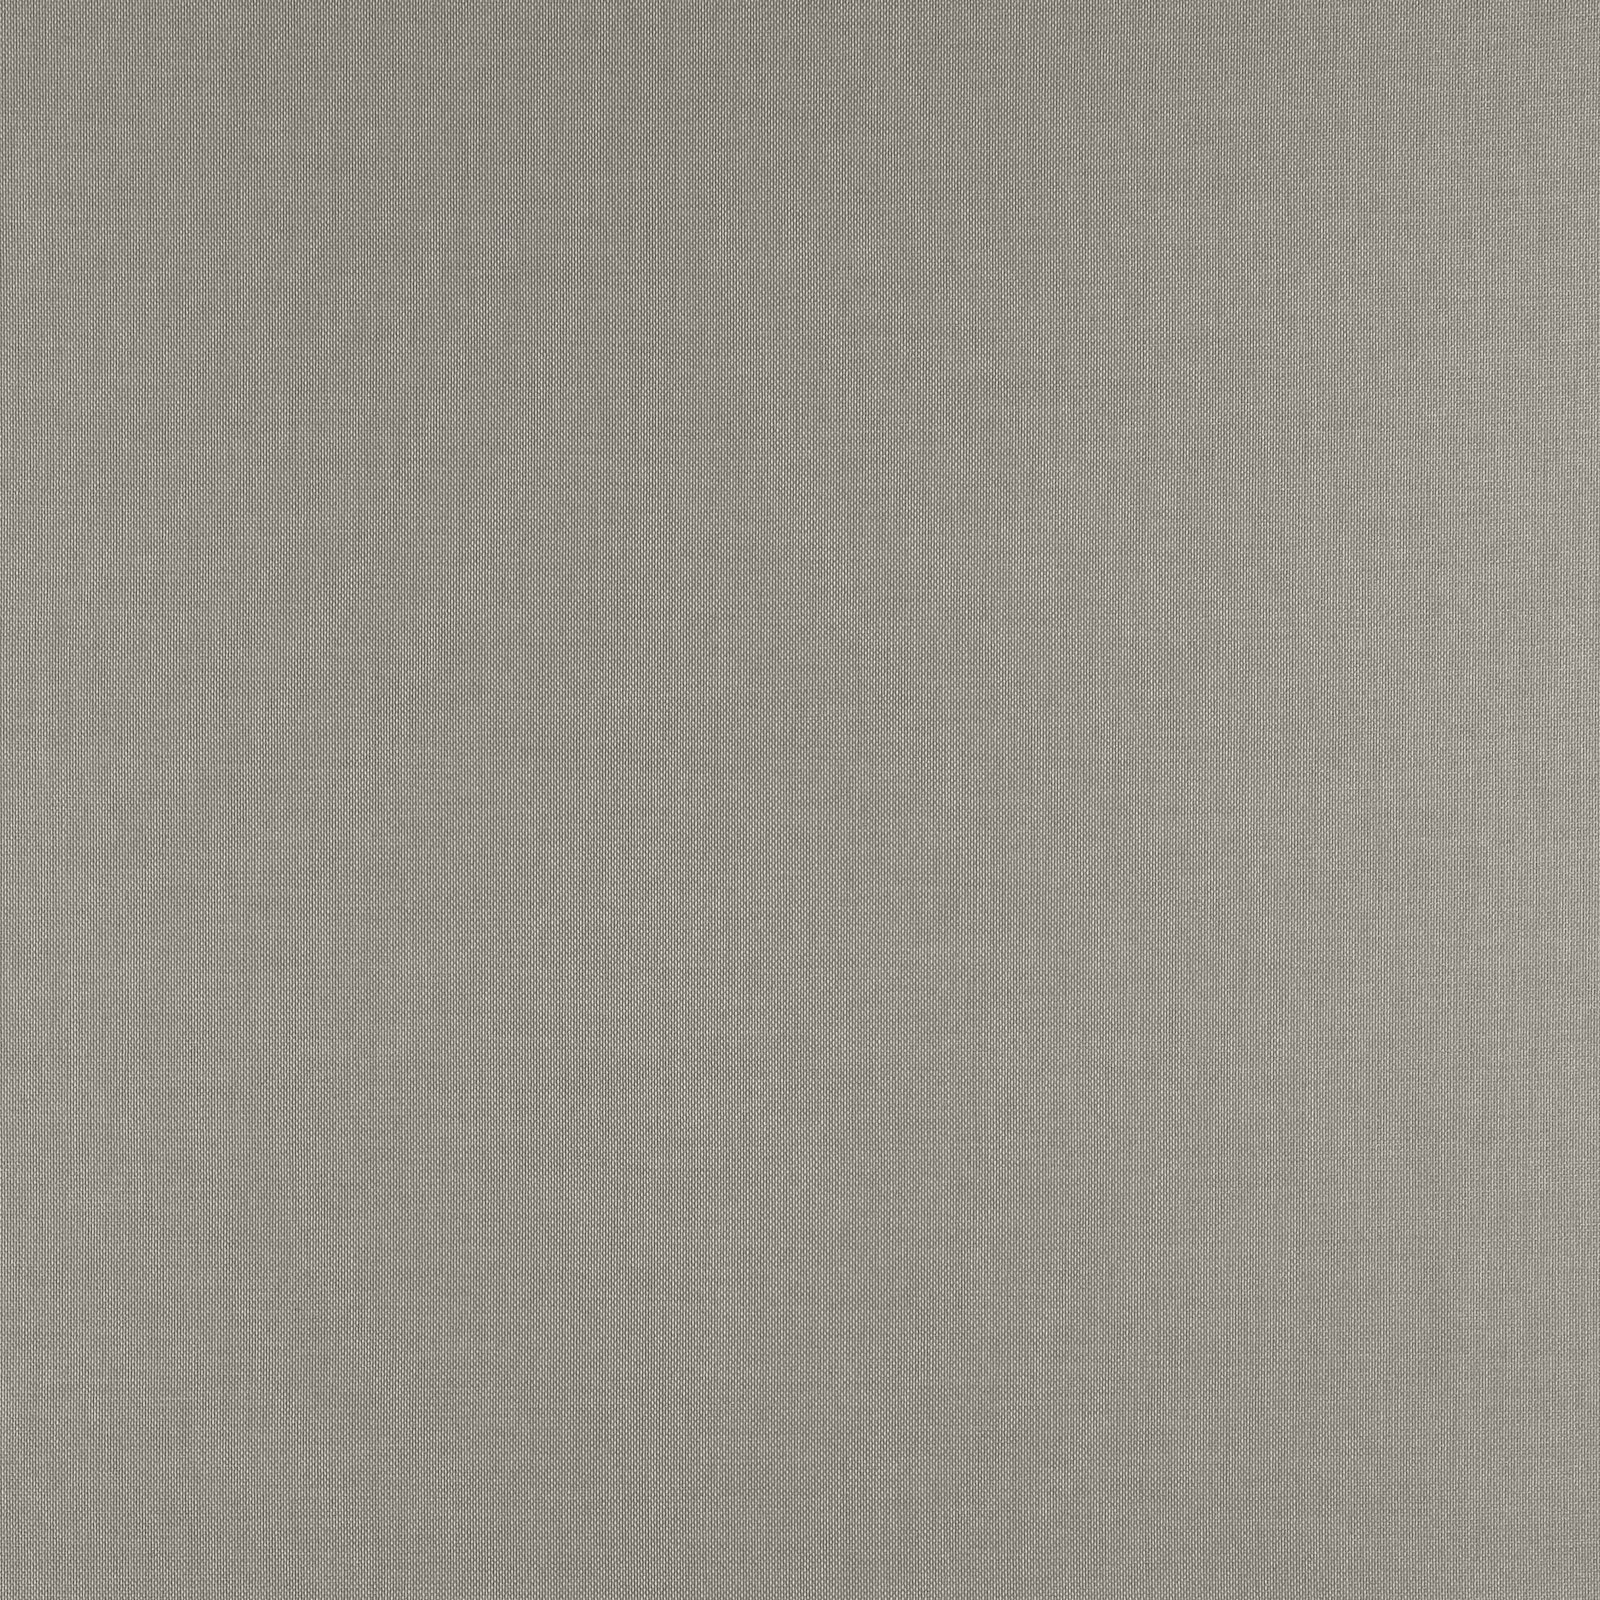 Upholstery fabric light grey 821769_pack_solid